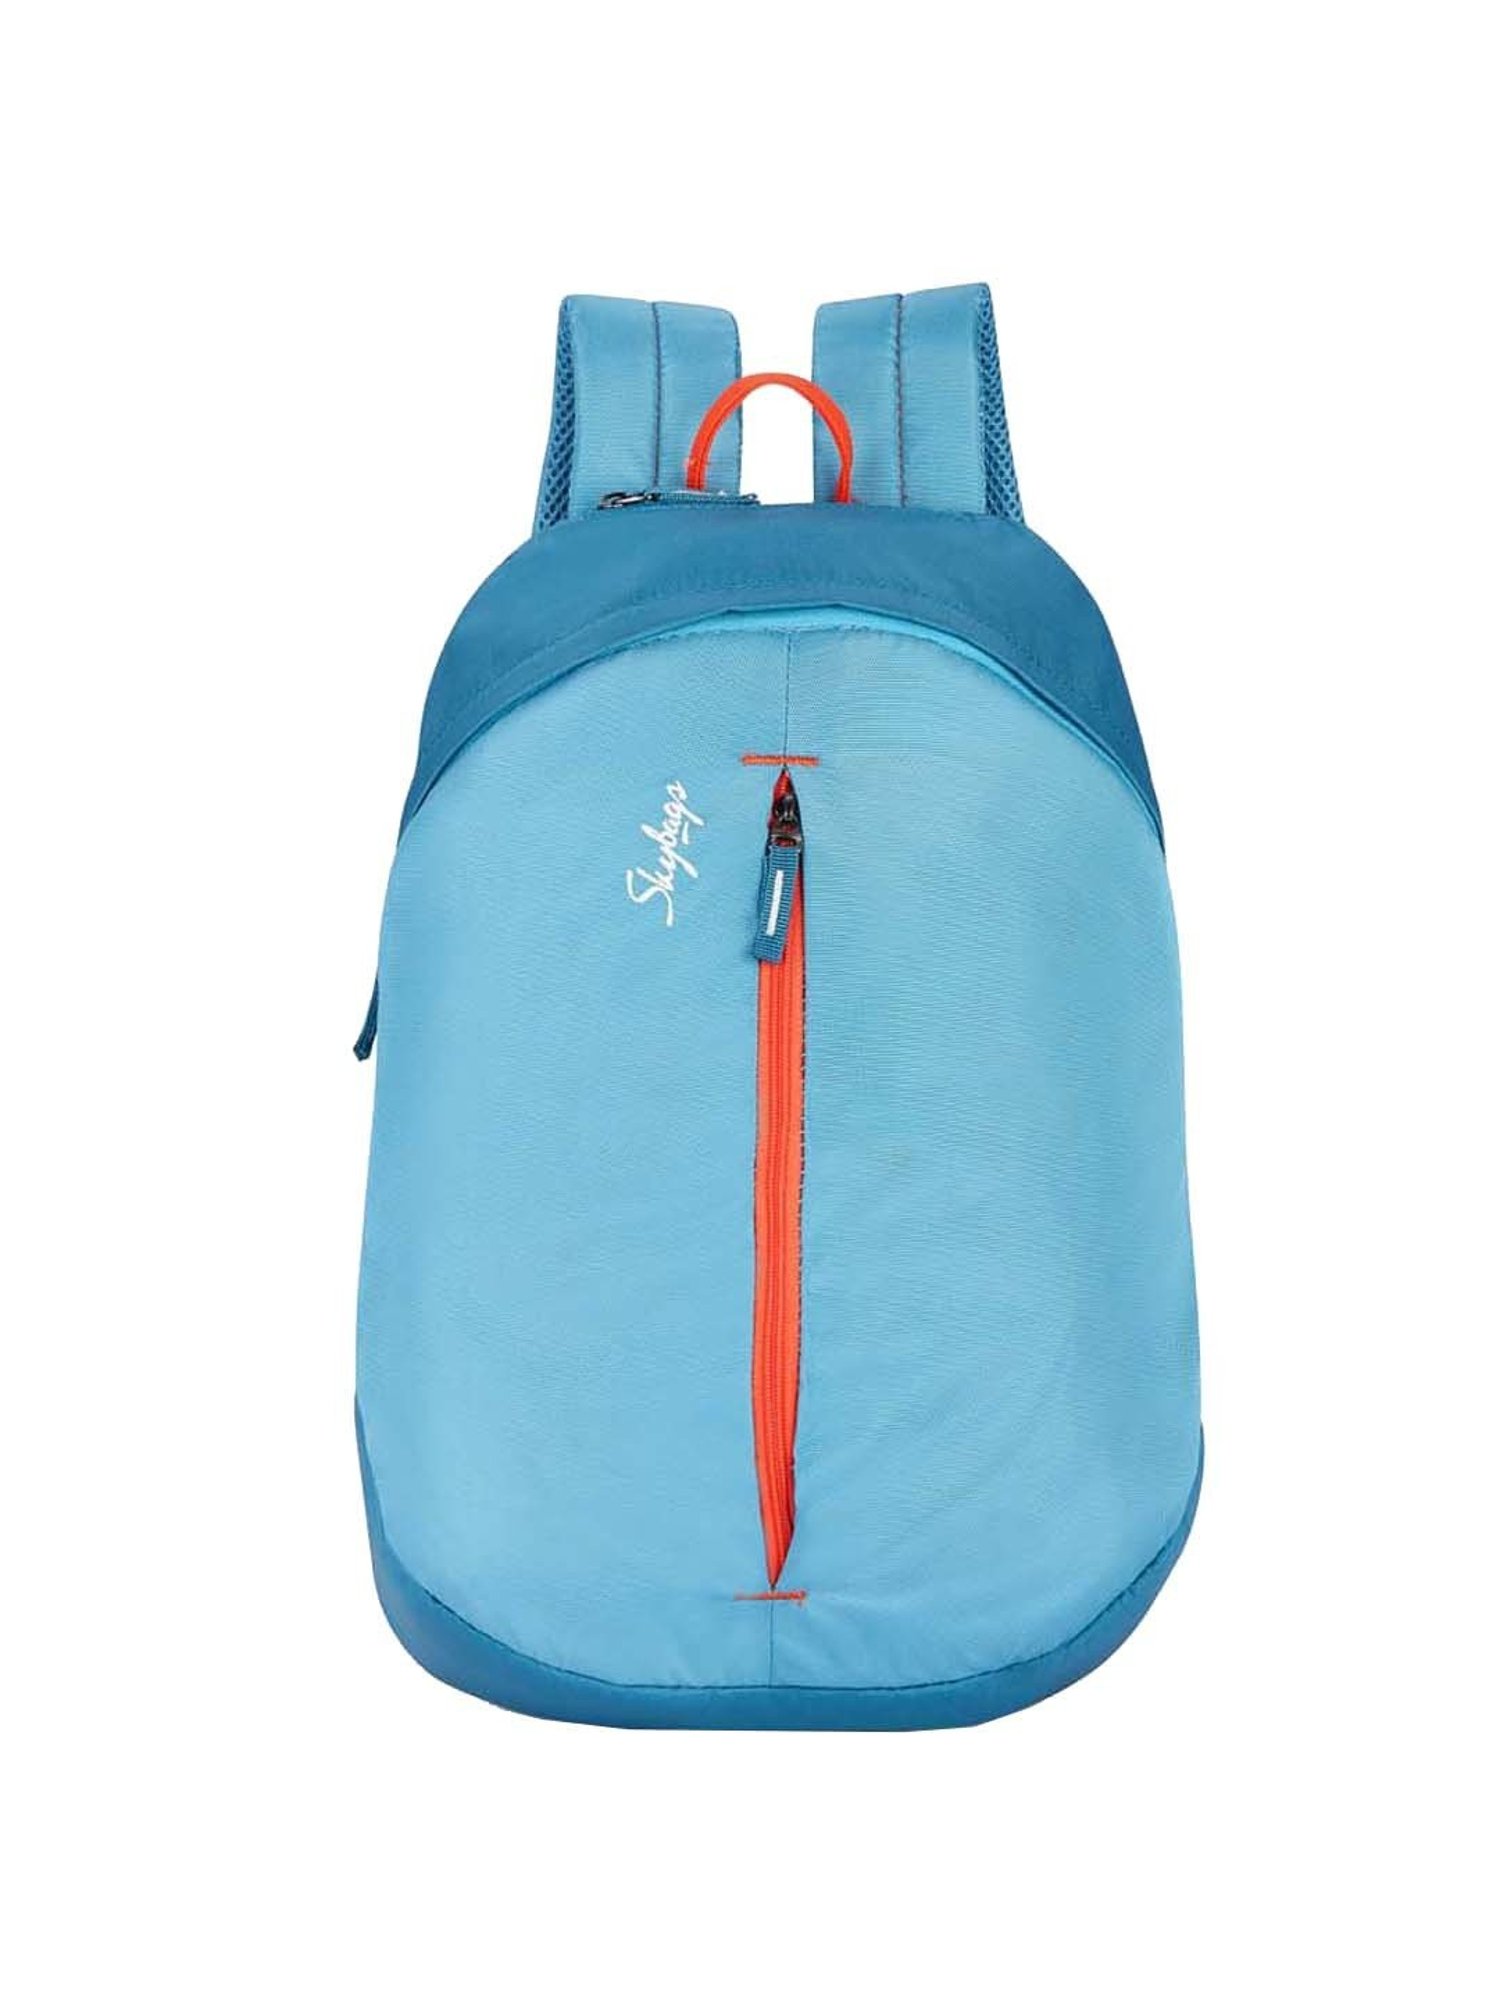 Buy Skybags Hd Polyester Multicolour Backpack ,25 Litres Online - Backpacks  - Backpacks - Discontinued - Pepperfry Product